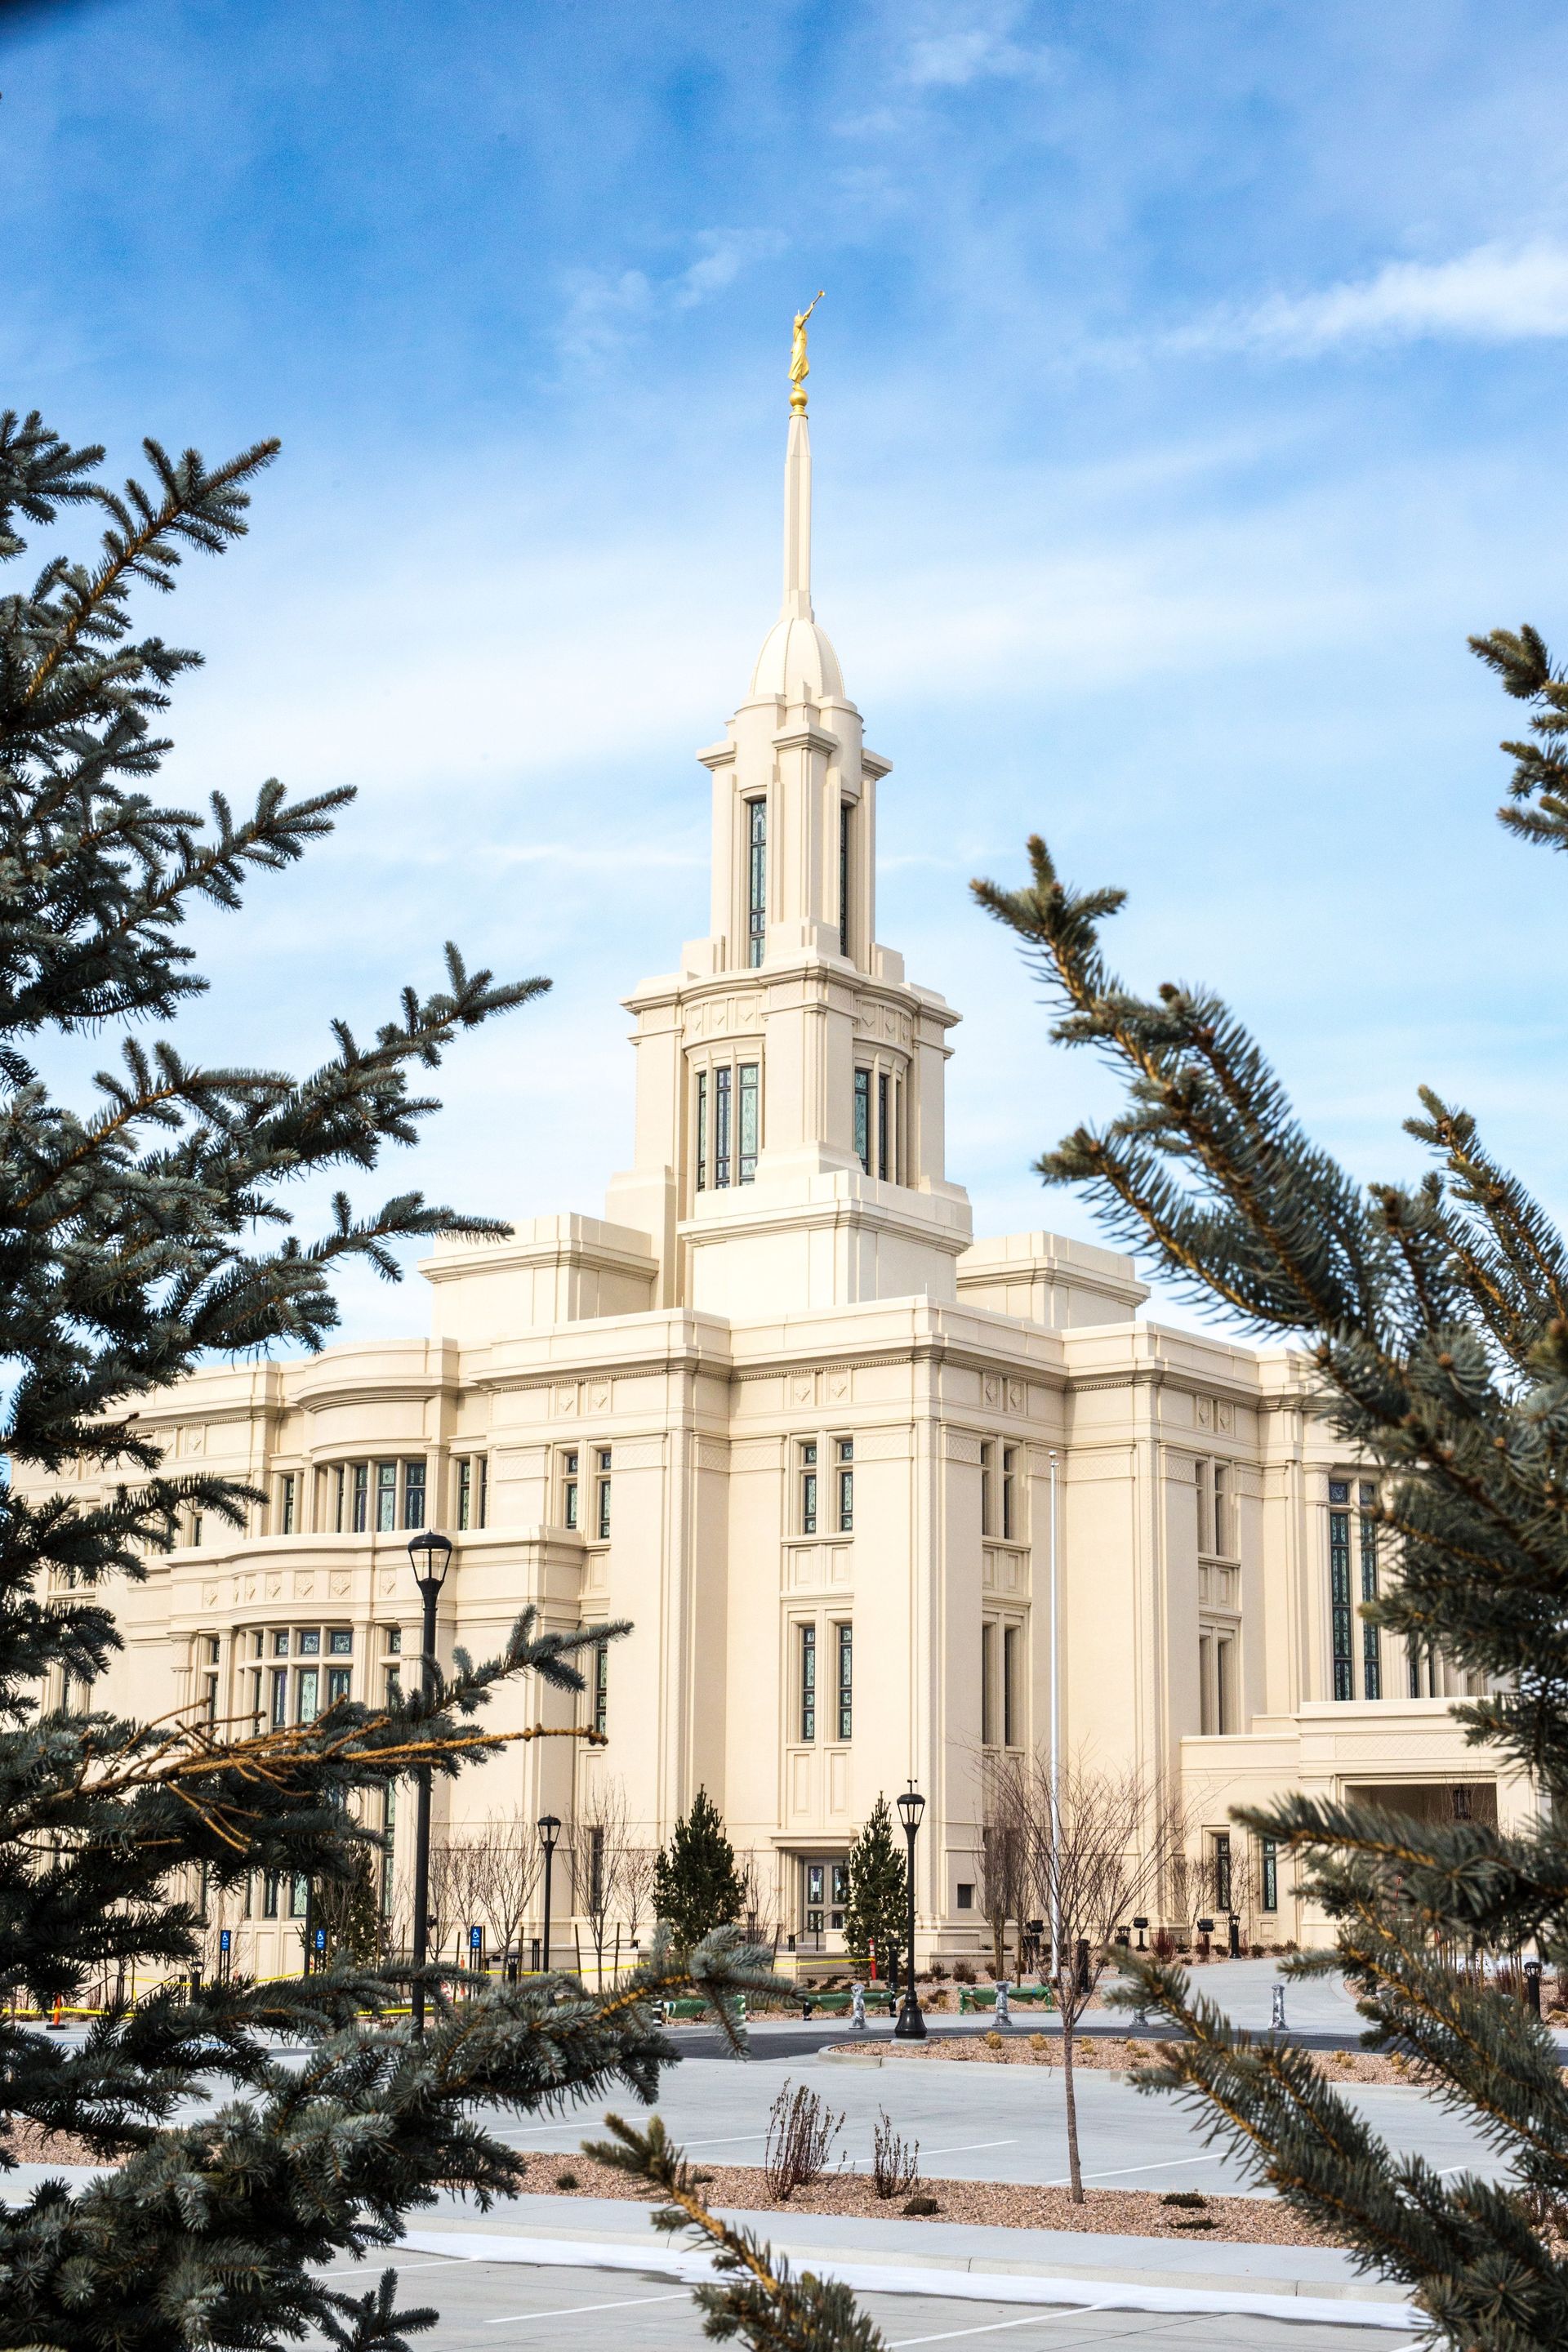 The side of the Payson Utah Temple during the day.